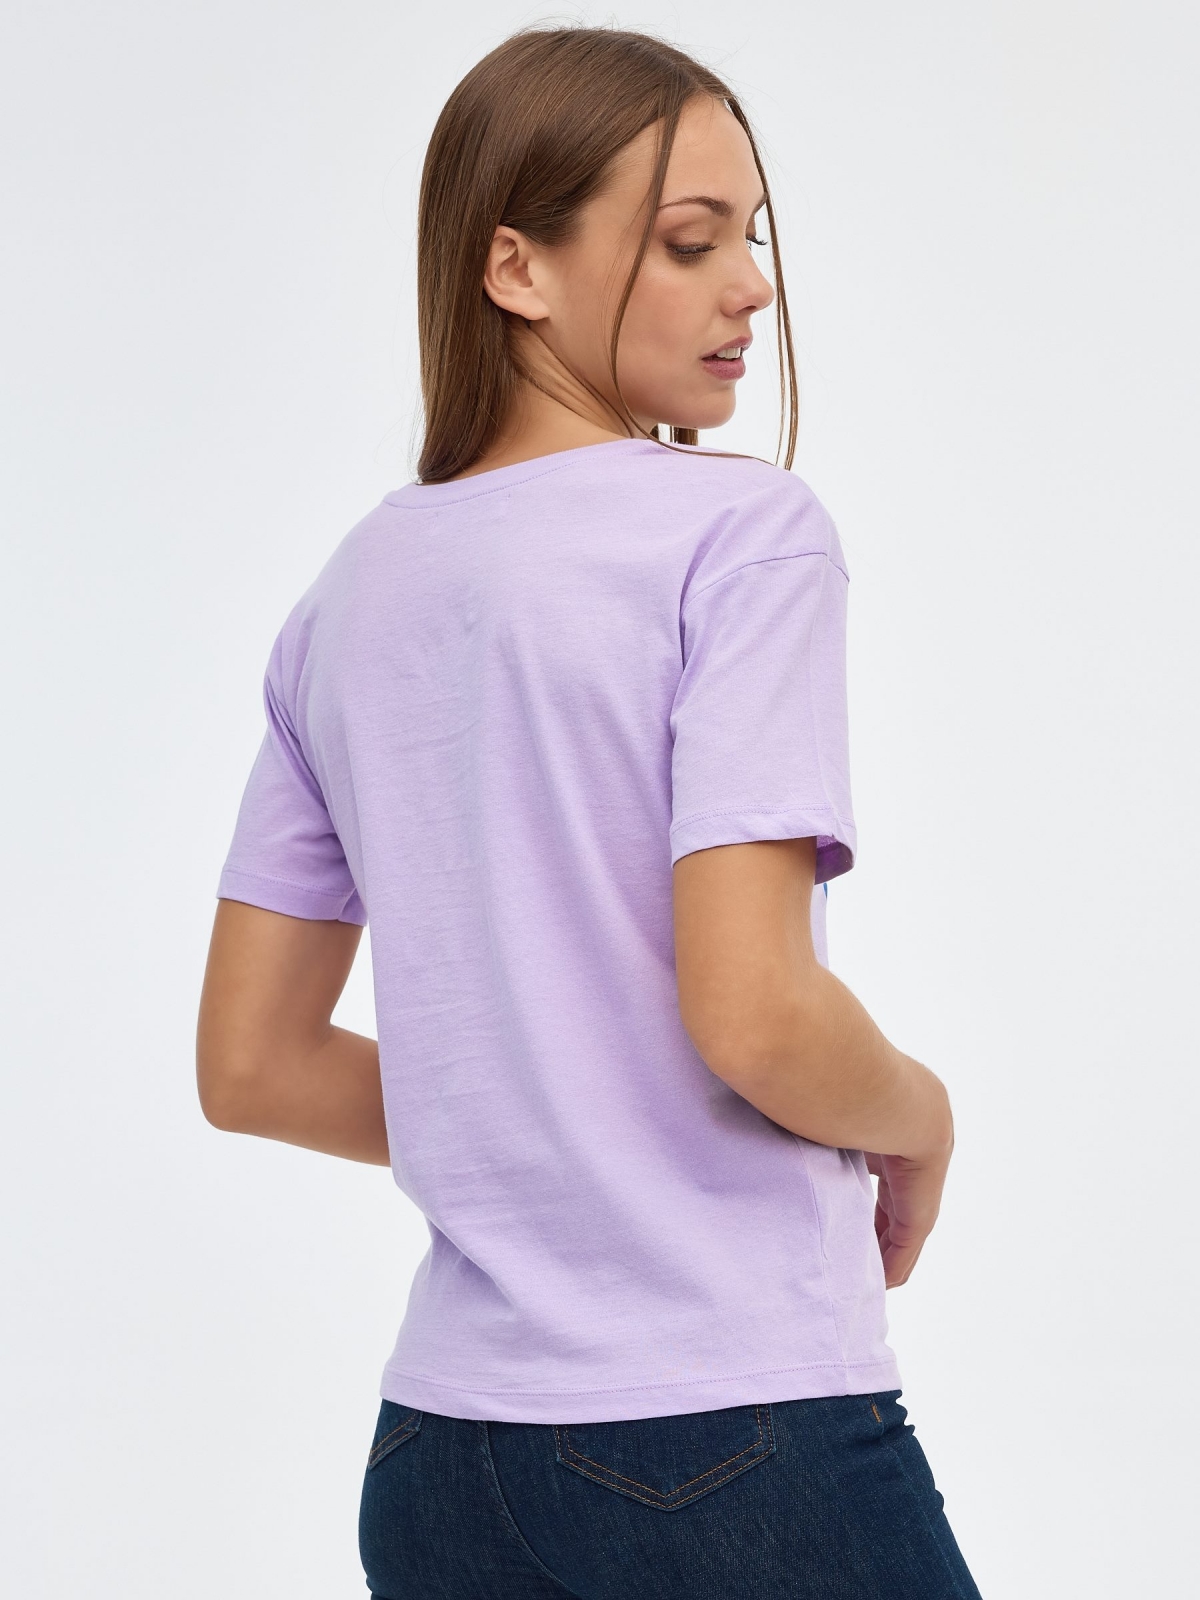 Flower print t-shirt lilac middle back view